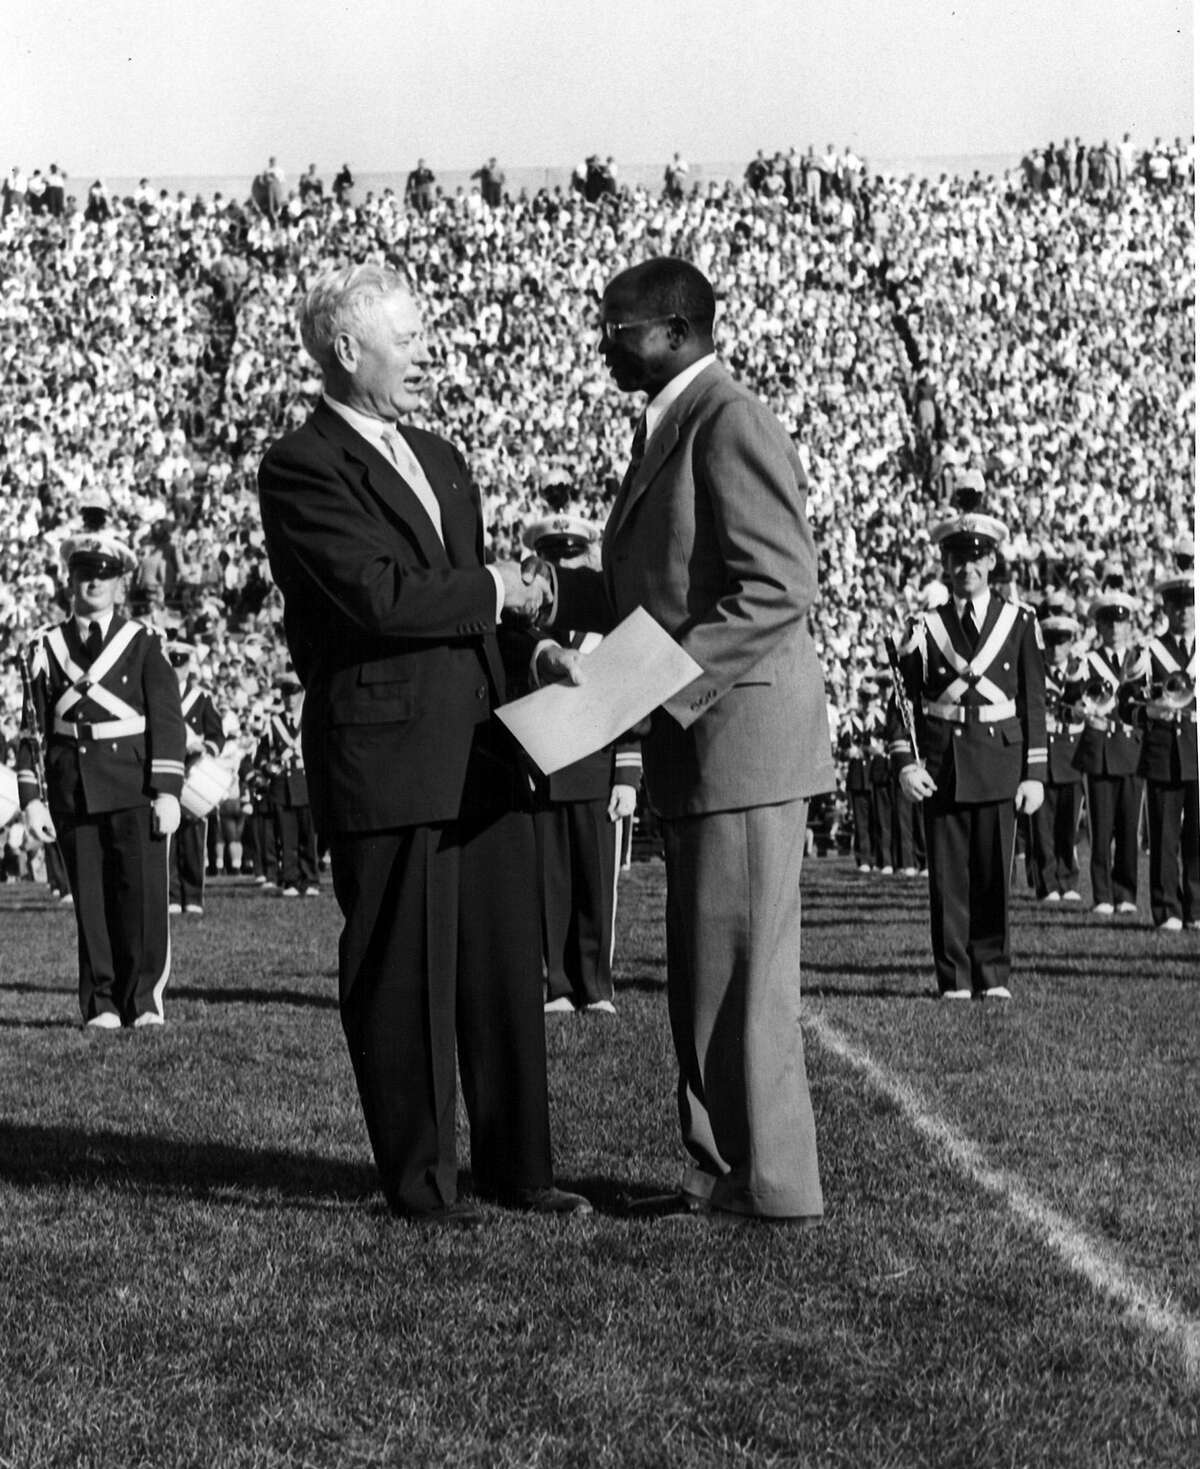 Gideon Gideon (right) was honored, with the rest of the team, at halftime of 1953 MSU game on the 40th anniversary of their 1913 unbeaten season.